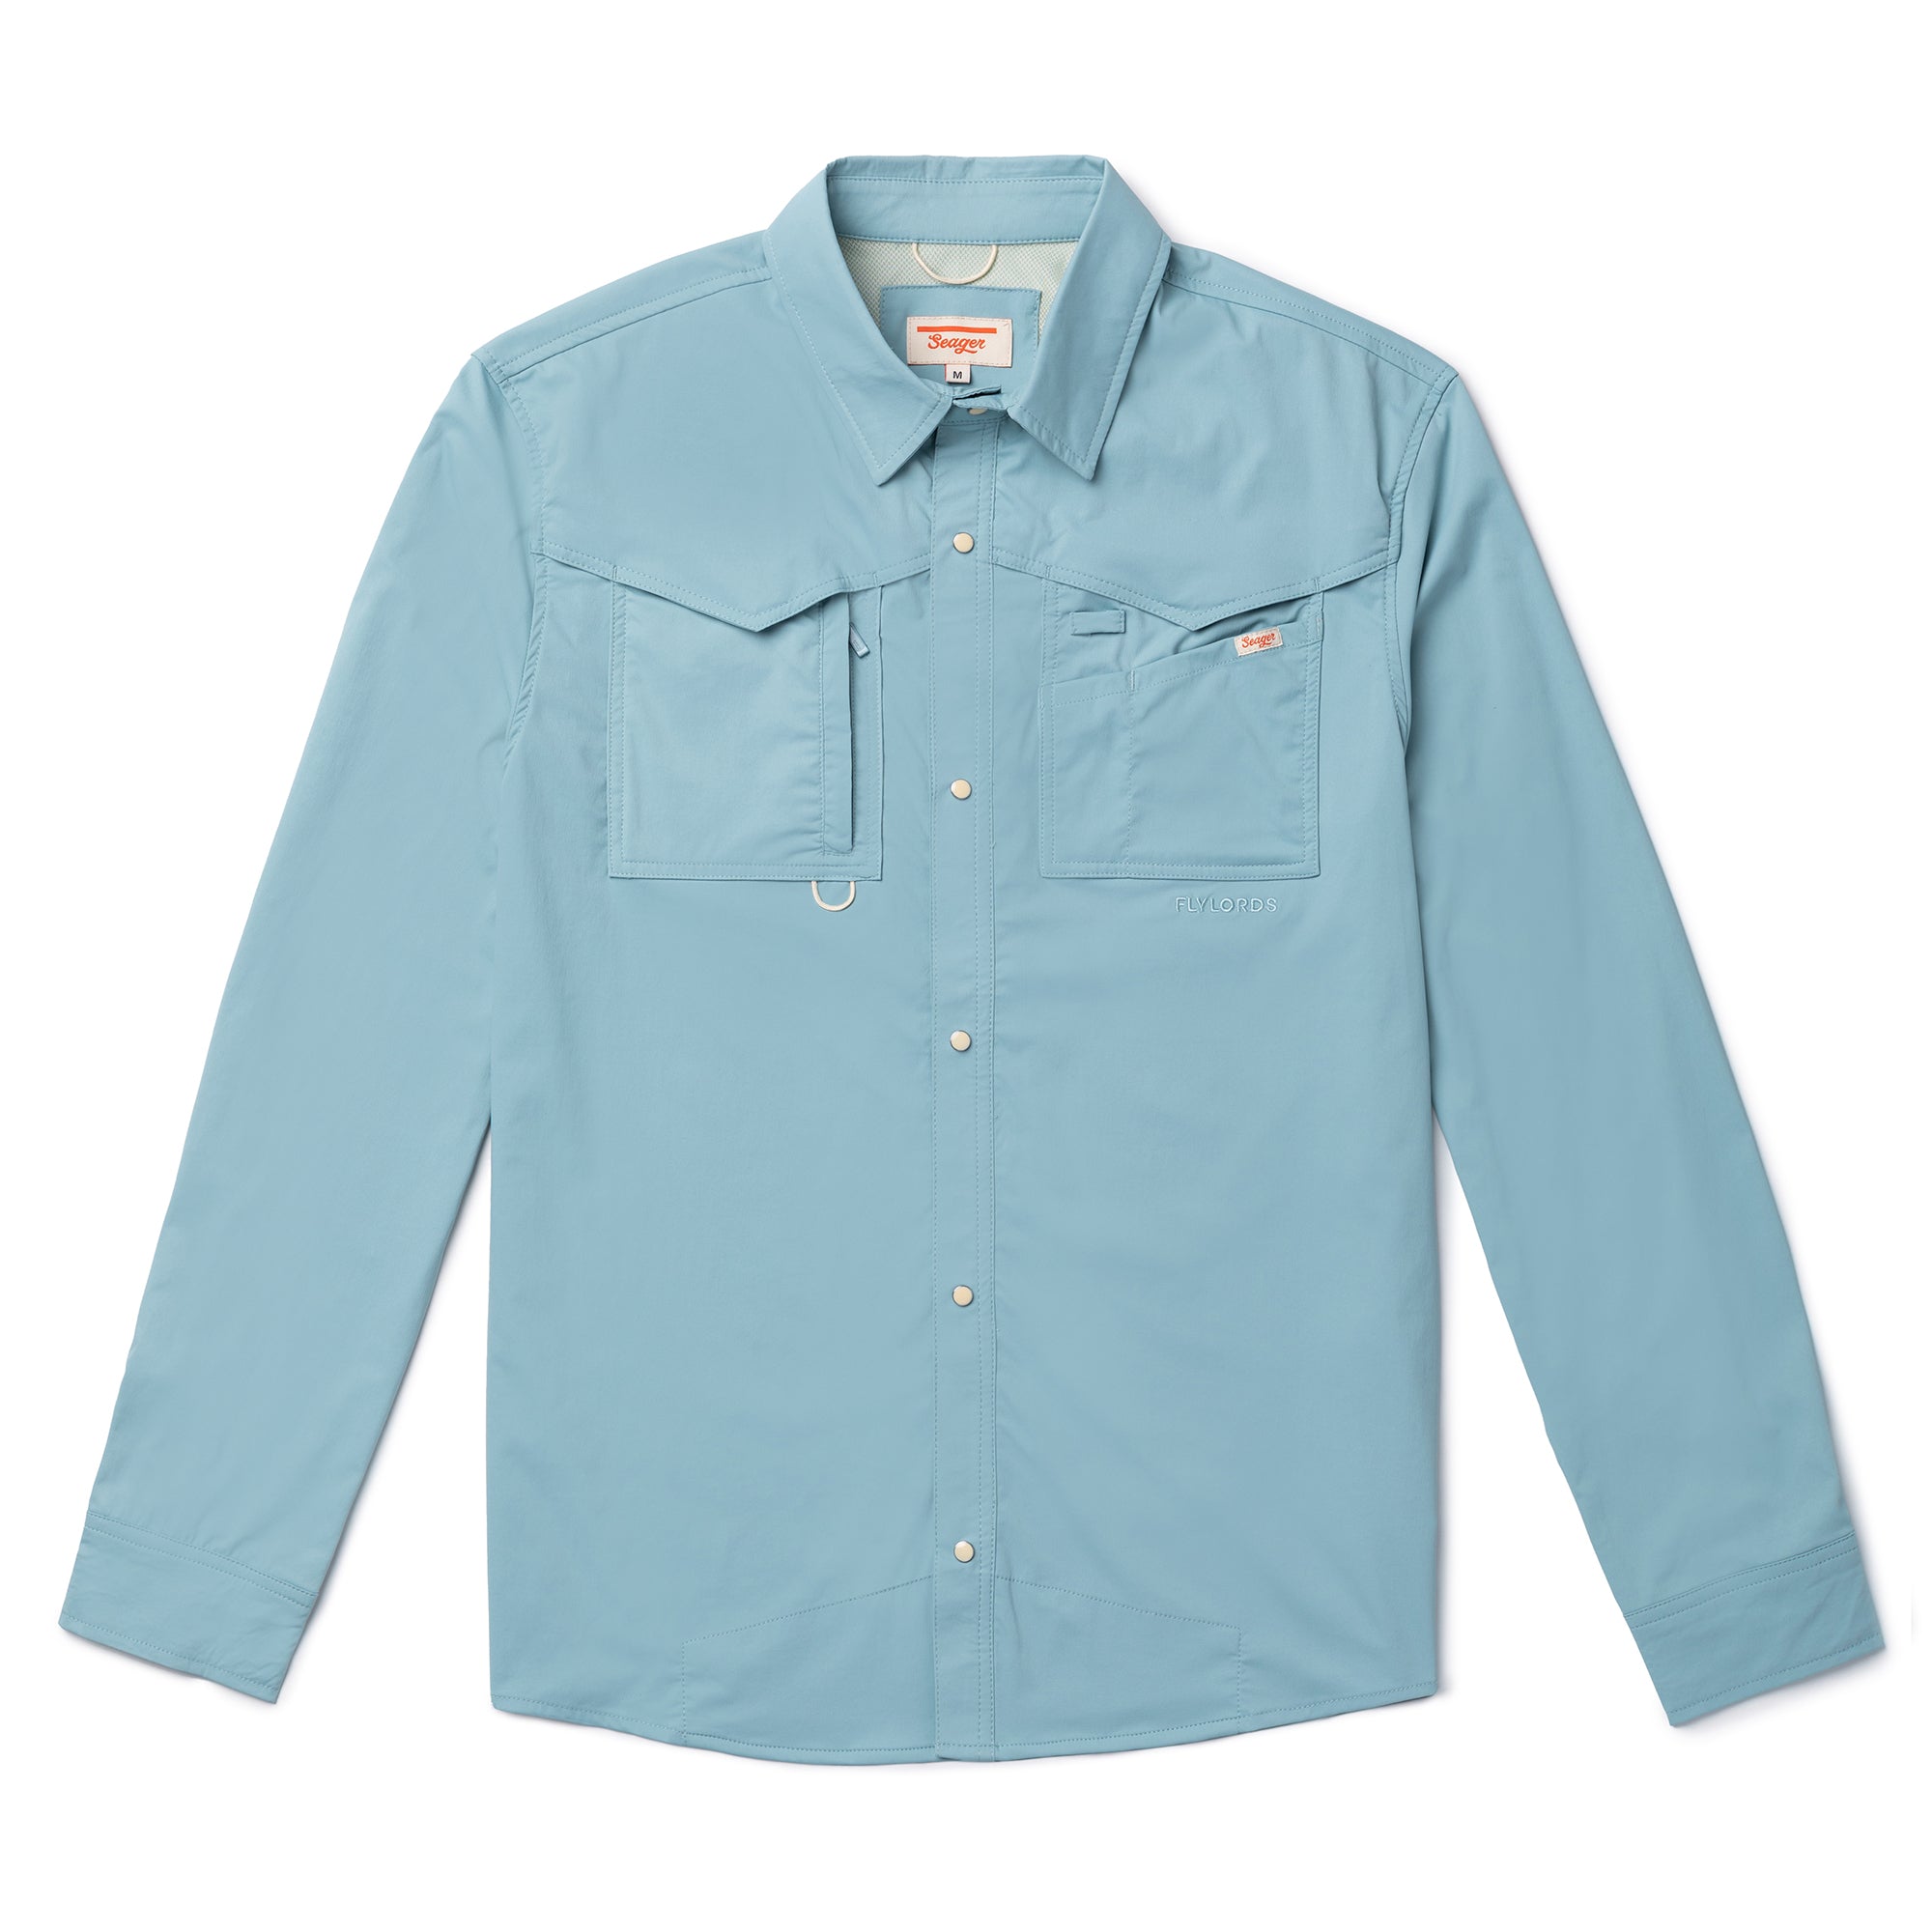 Seager x Flylords El Pescador Shirt Teal - Water Resistant Nylon/Spandex Fishing Western Pearl Snaps & Ventilated Mesh, S